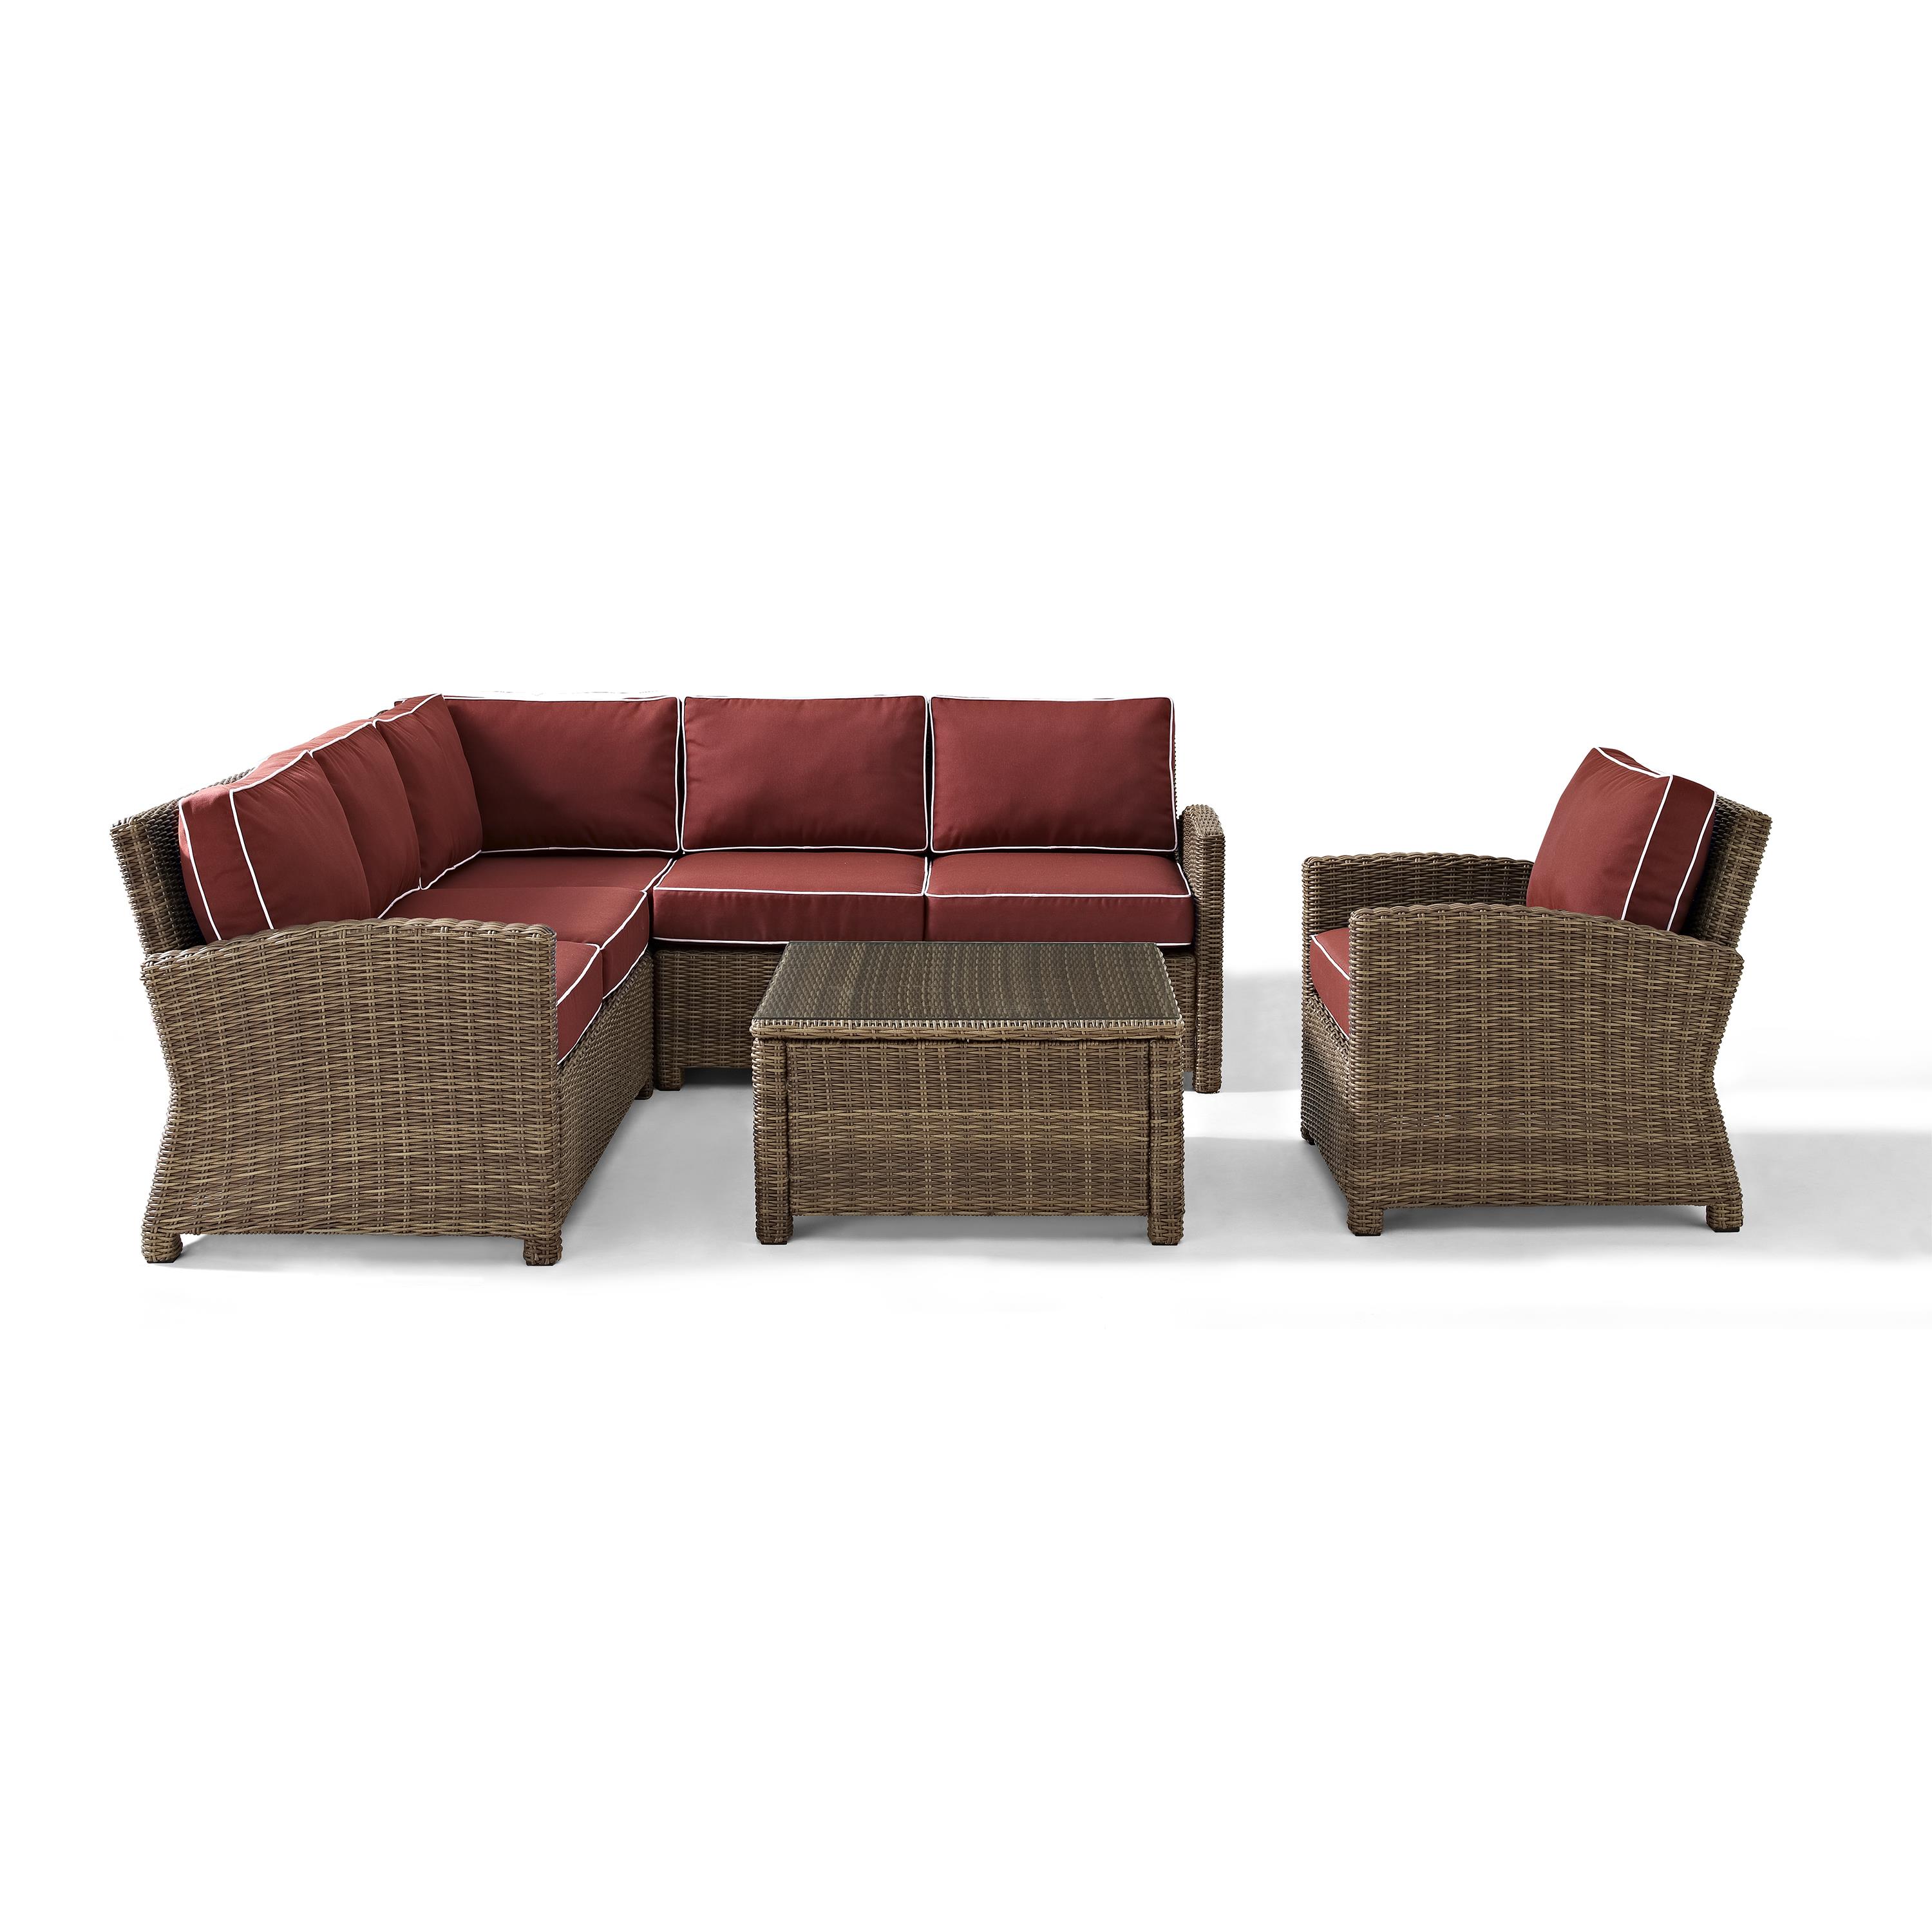 Crosley Furniture Bradenton 5 Pc Fabric Patio Sectional Set in Sangria Red - image 5 of 10